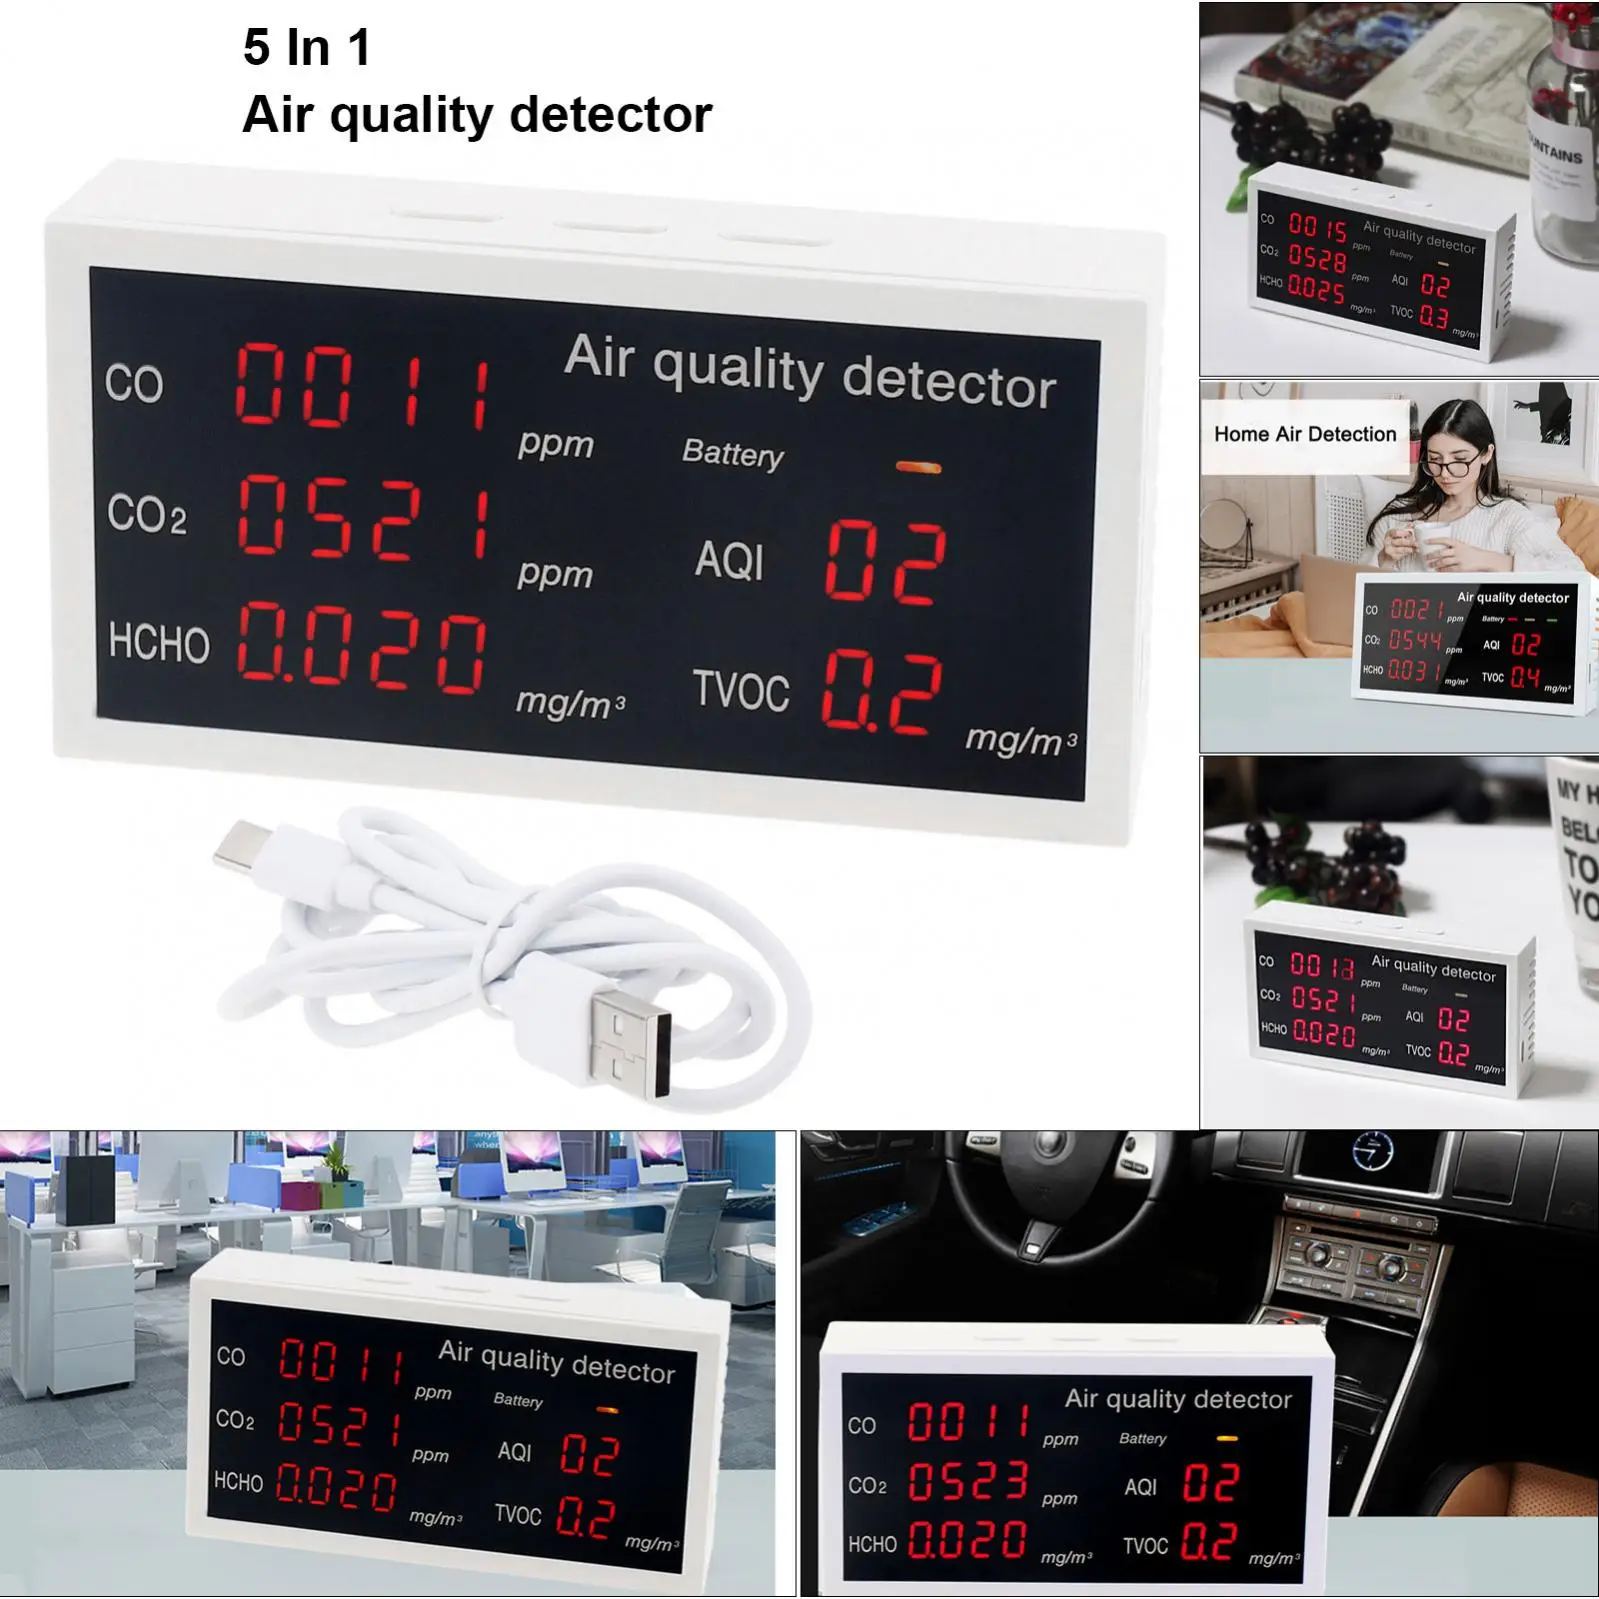 

5 In 1 Air Quality Monitor Carbon Dioxide Formaldehyde Detector CO2 HCHO TVOC CO AQI Gas Analyzer Air Quality Meter Tester